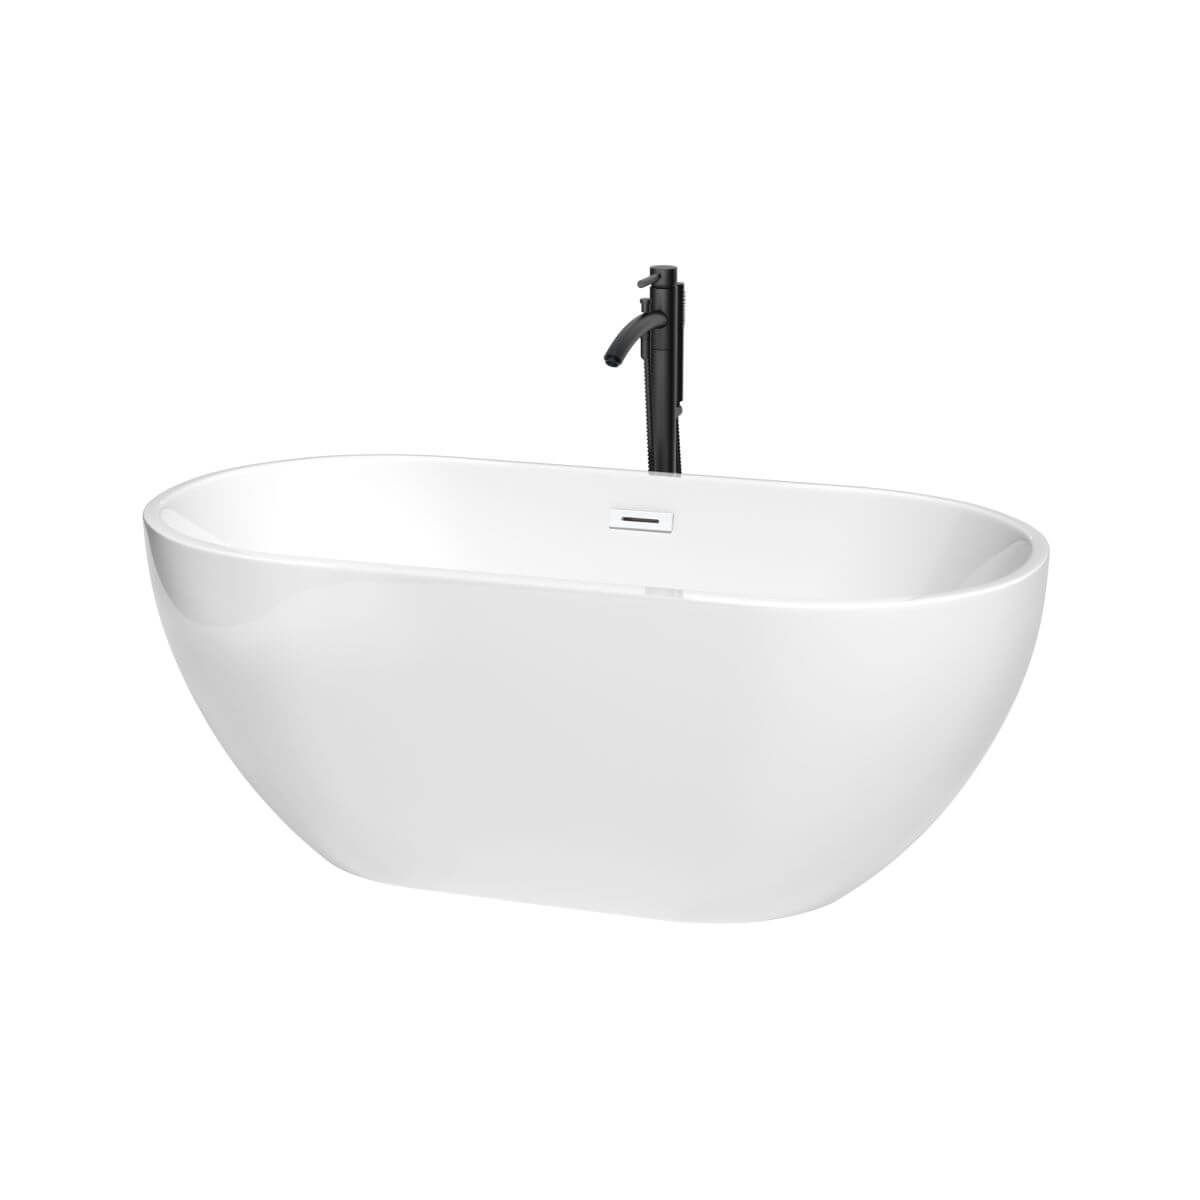 Wyndham Collection Brooklyn 60 inch Freestanding Bathtub in White with Shiny White Trim and Floor Mounted Faucet in Matte Black - WCOBT200060SWATPBK